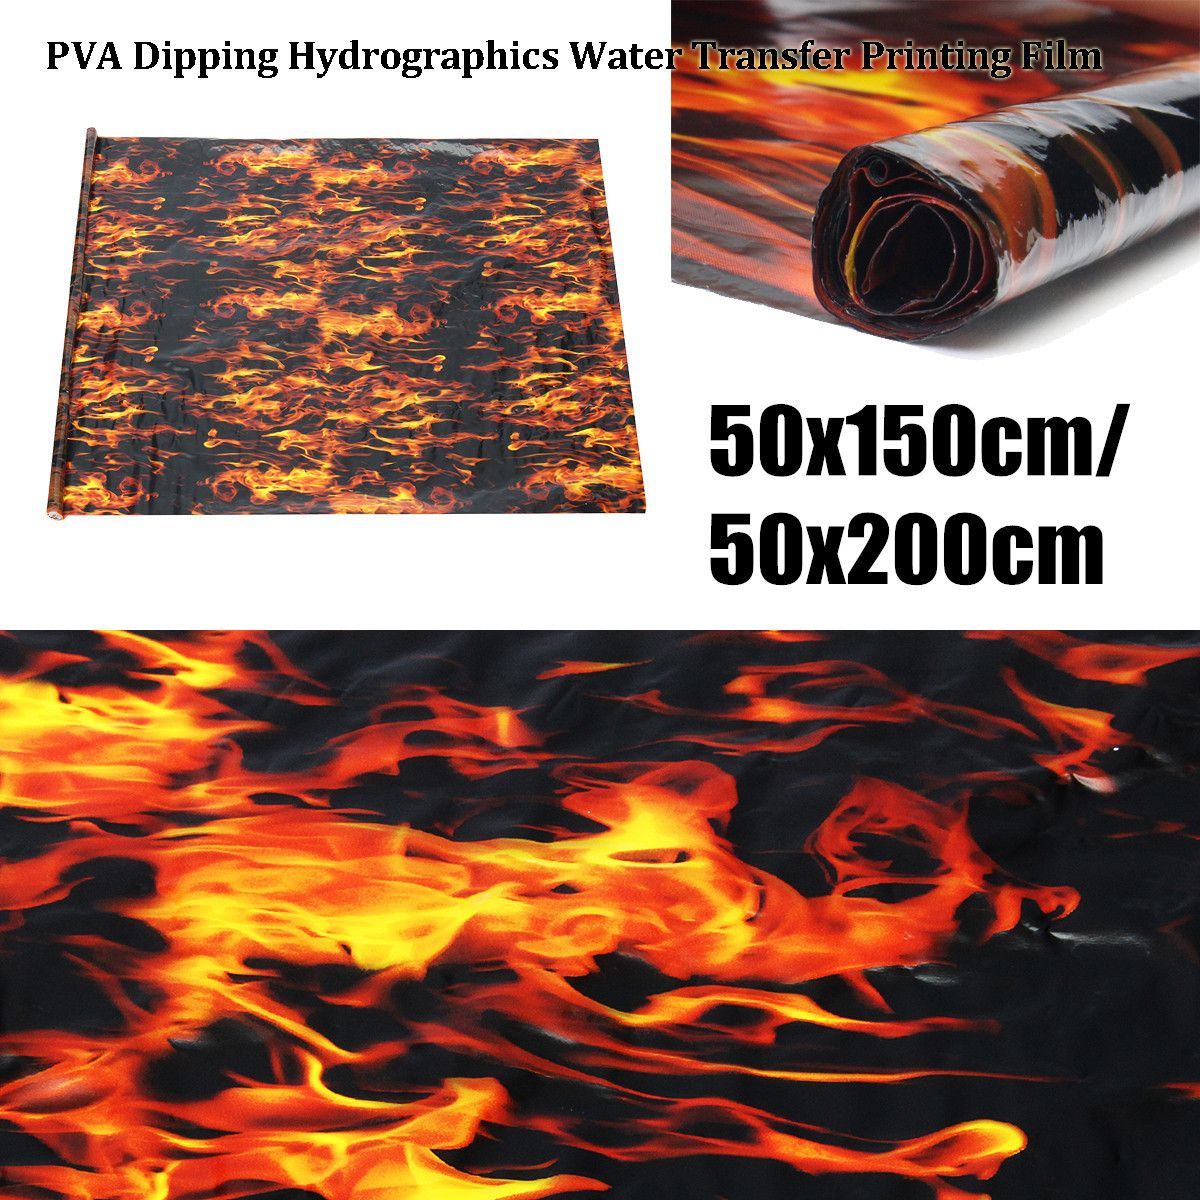 PVA-Hydrographic-Black-Flame-Fire-Water-Transfer-Printing-Hydro-Dip-Film-Car-Decal-1370769